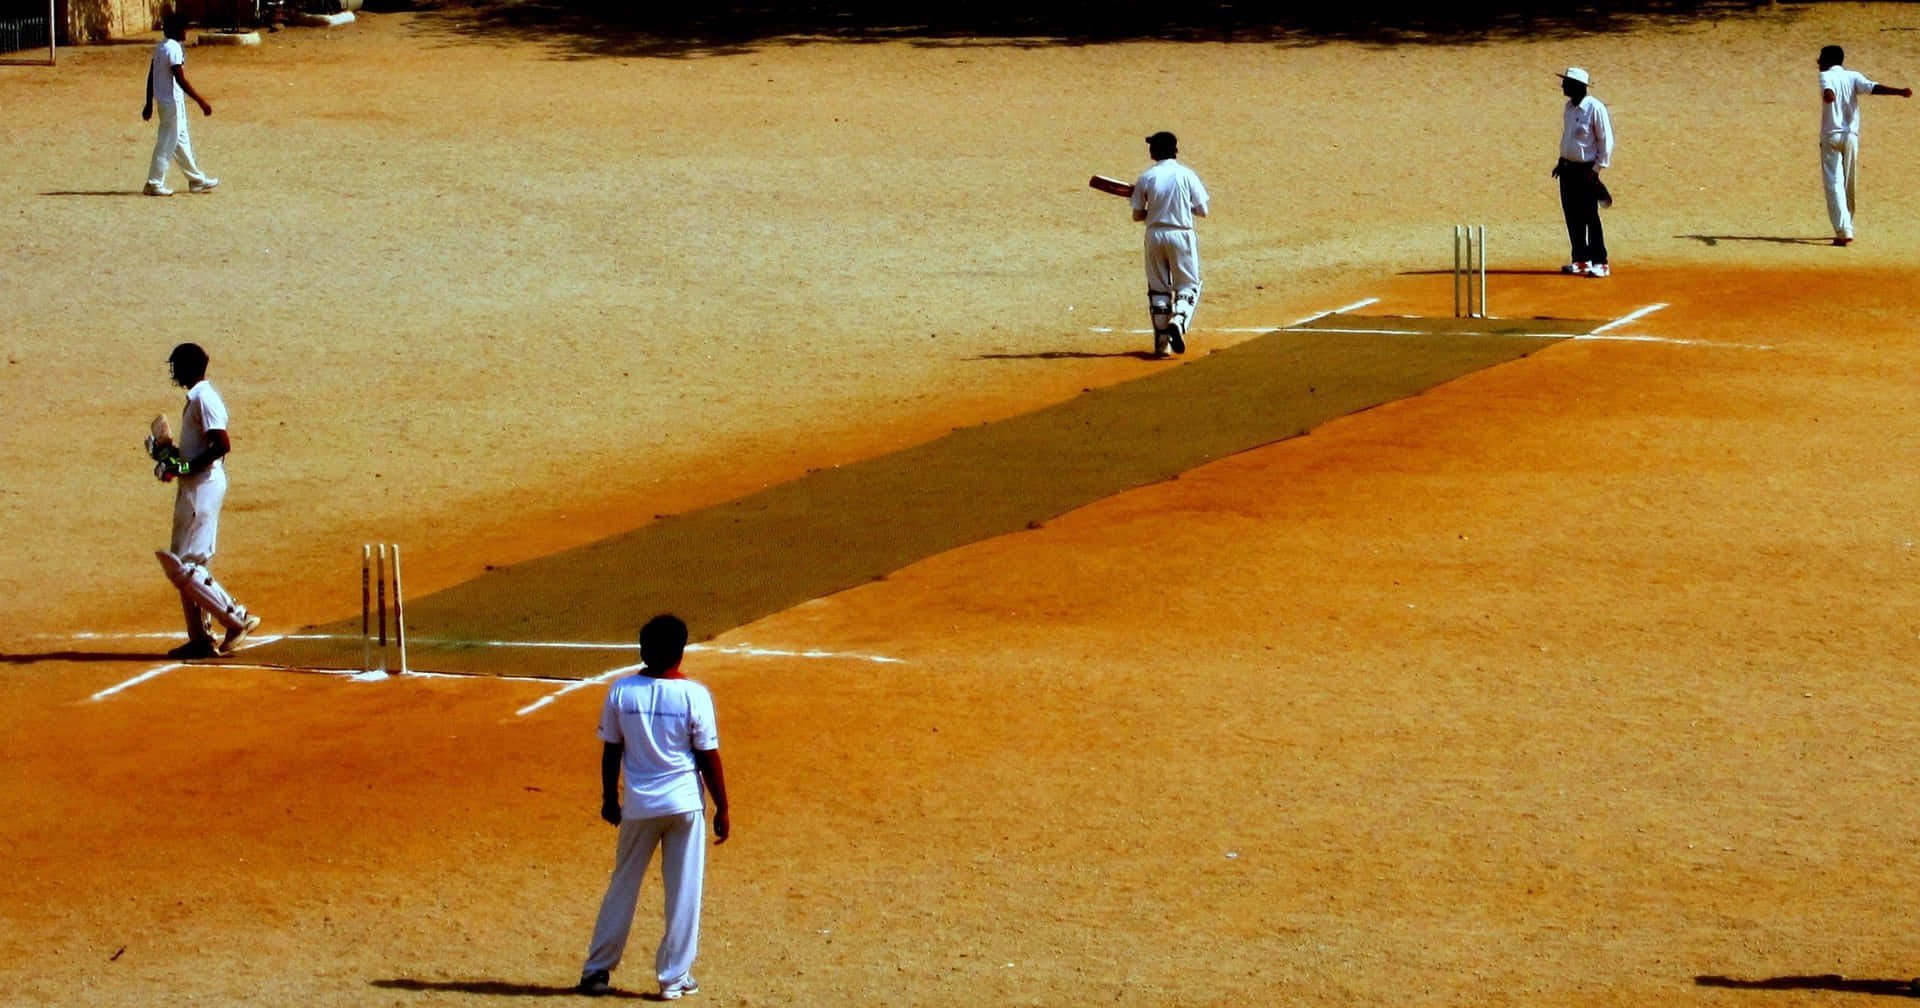 The Game of Cricket - An International Sporting Tradition